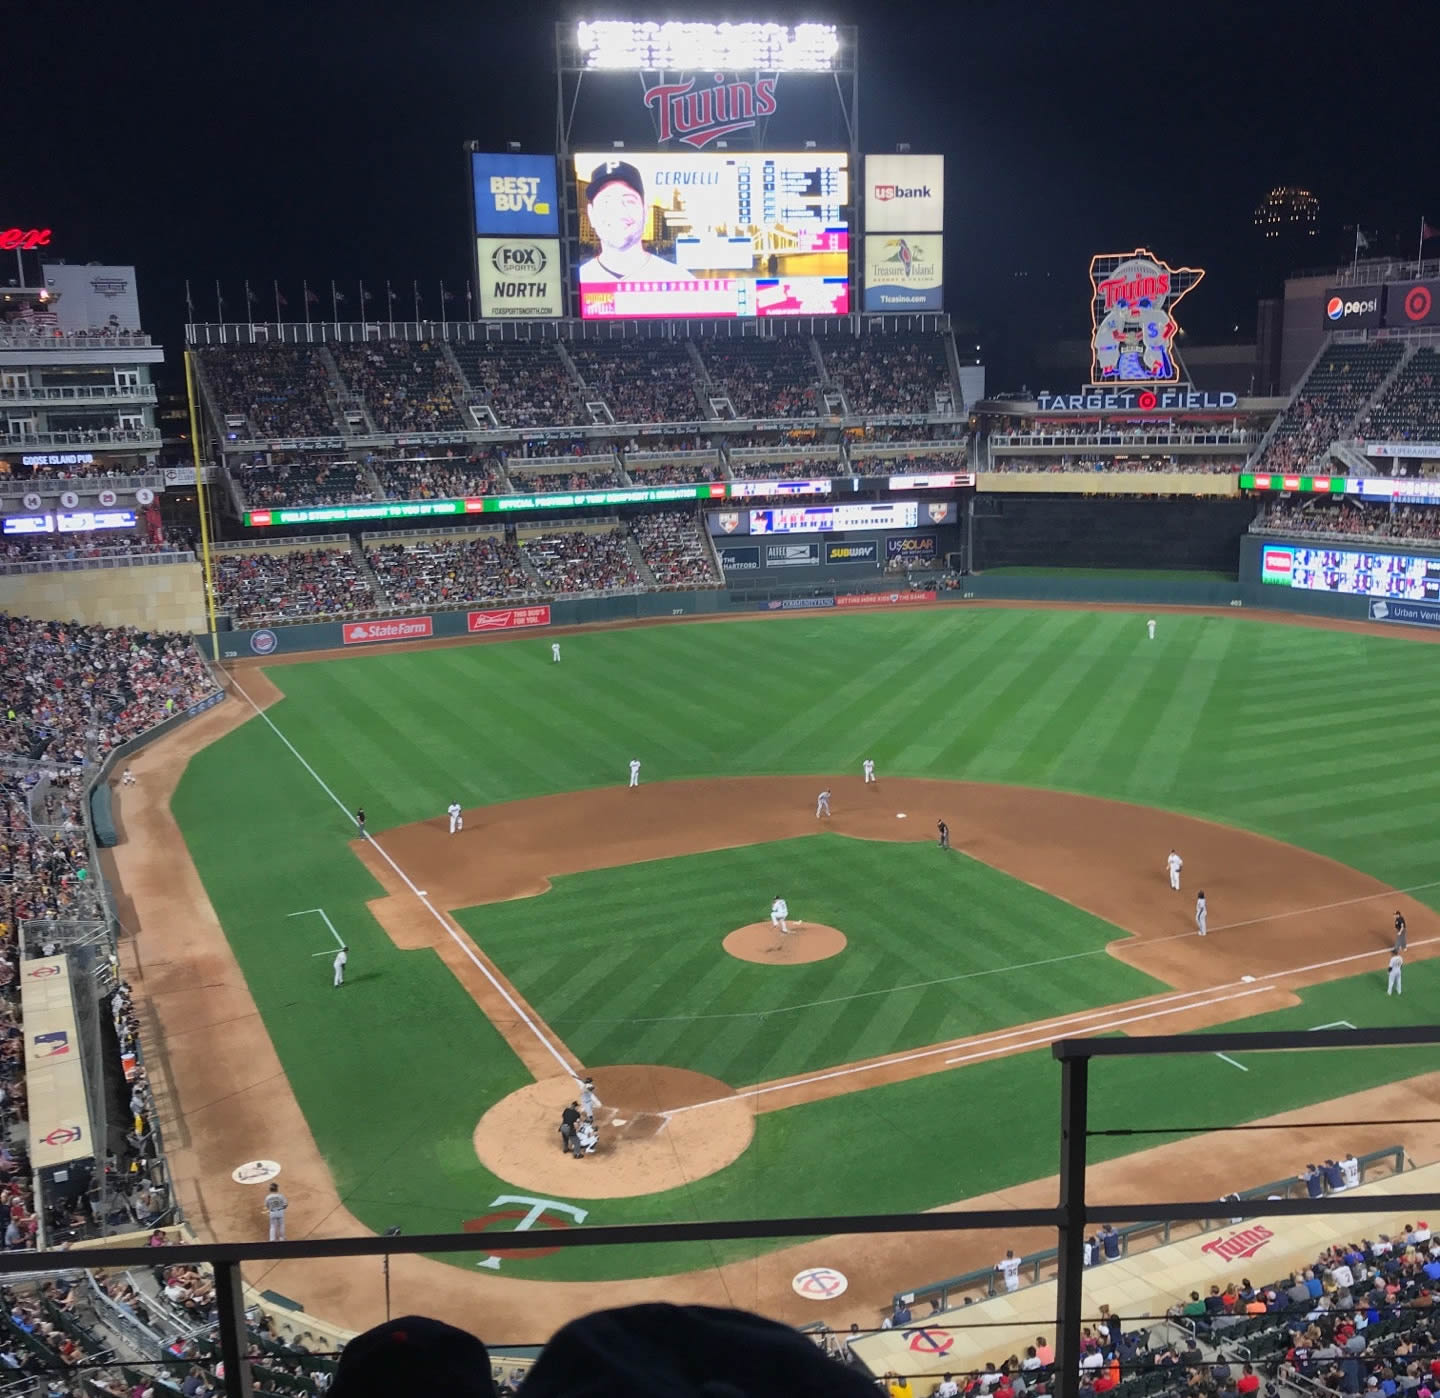 section 313, row 3 seat view  - target field